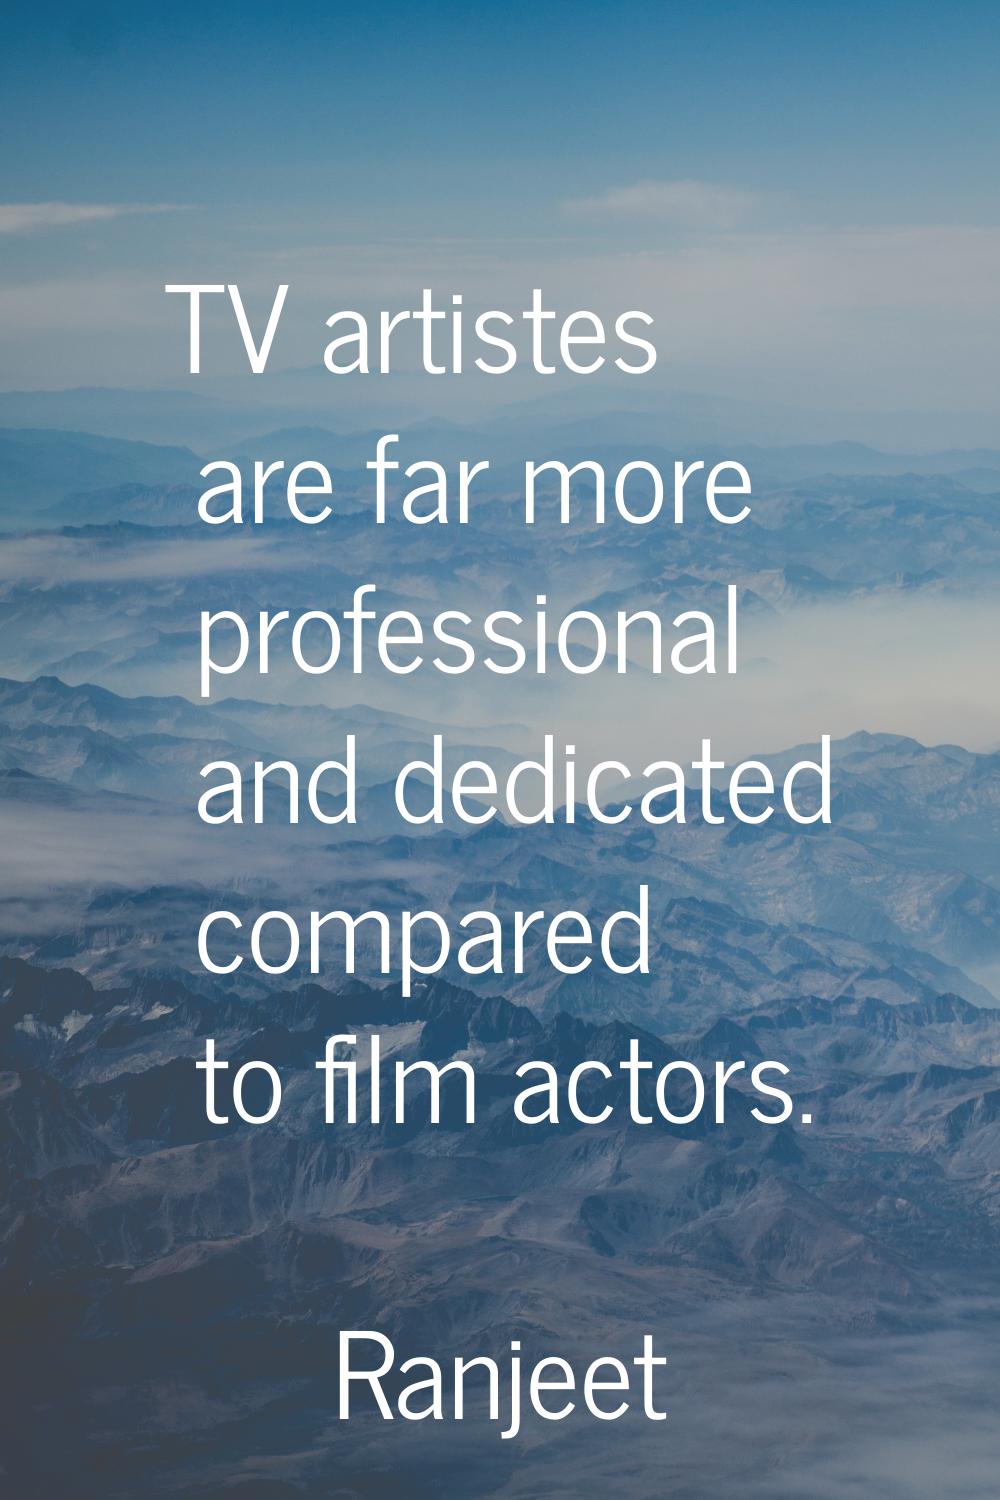 TV artistes are far more professional and dedicated compared to film actors.